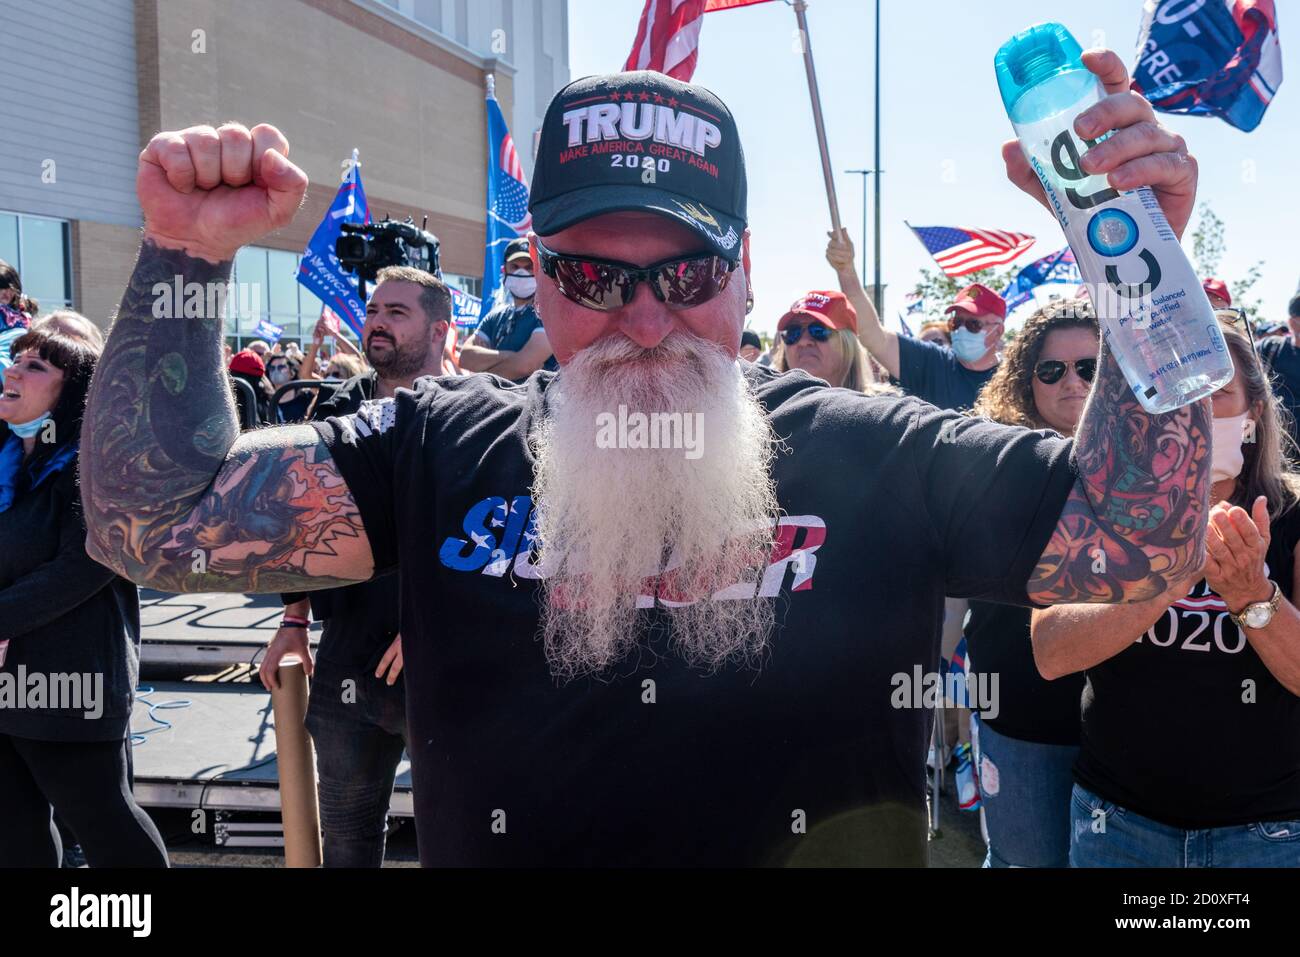 Trump supporters gather for a pro-Republican and pro-Law and Order rally on Staten Island, New York on October 3, 2020. The rally comes a day after President Trump was hospitalized for COVID-19. (Photo by Gabriele Holtermann/Sipa USA) Credit: Sipa USA/Alamy Live News Stock Photo